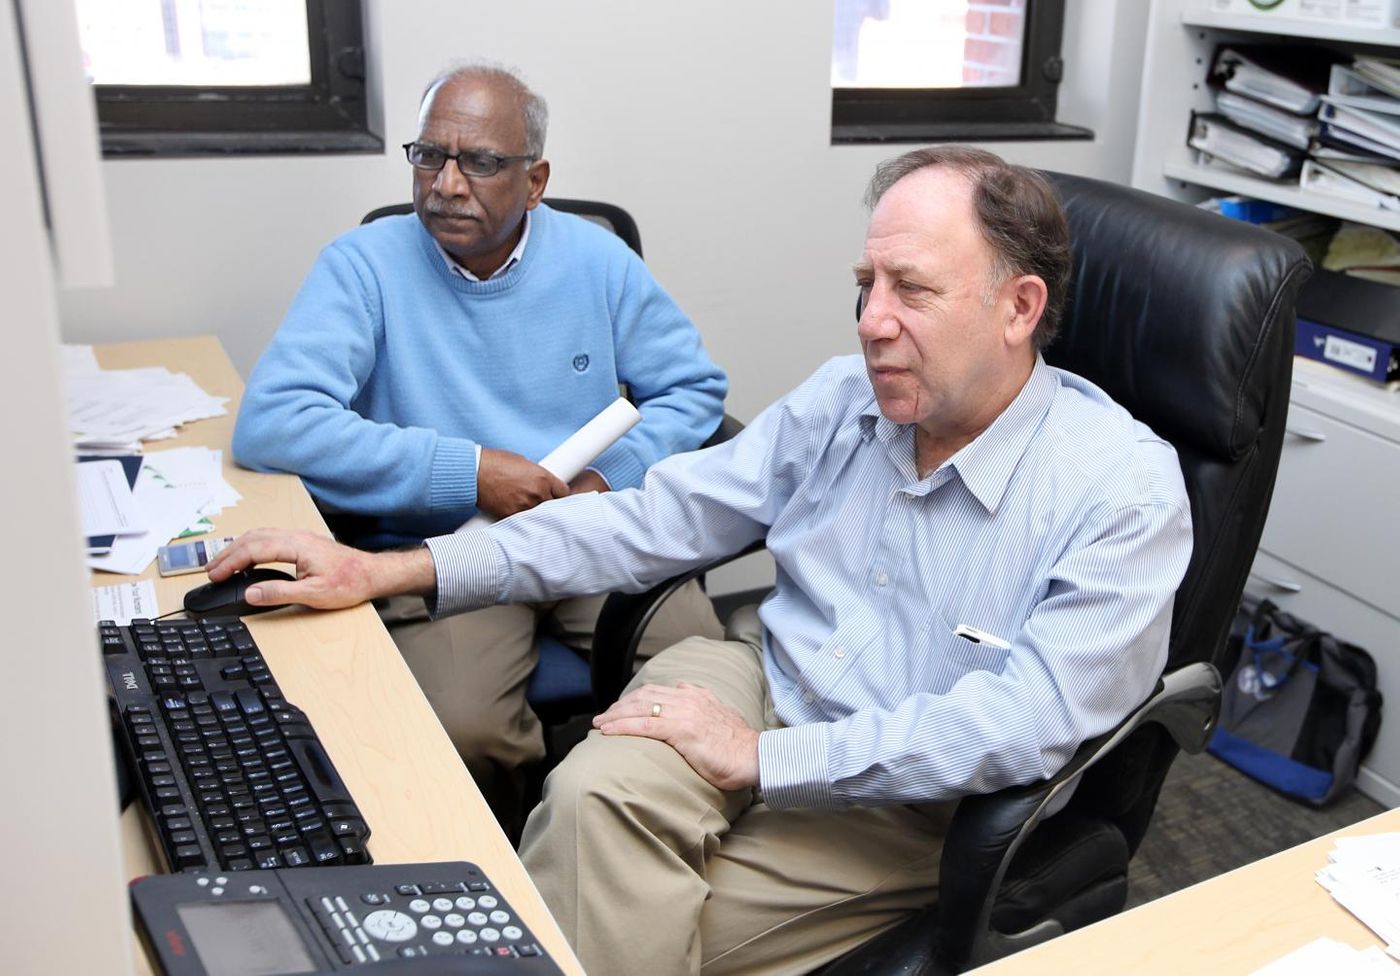 Fibrosis researchers Stanley Hoffman, Ph.D. and Dhandapani Kuppuswamy, Ph.D. Source: Medical University of South Carolina